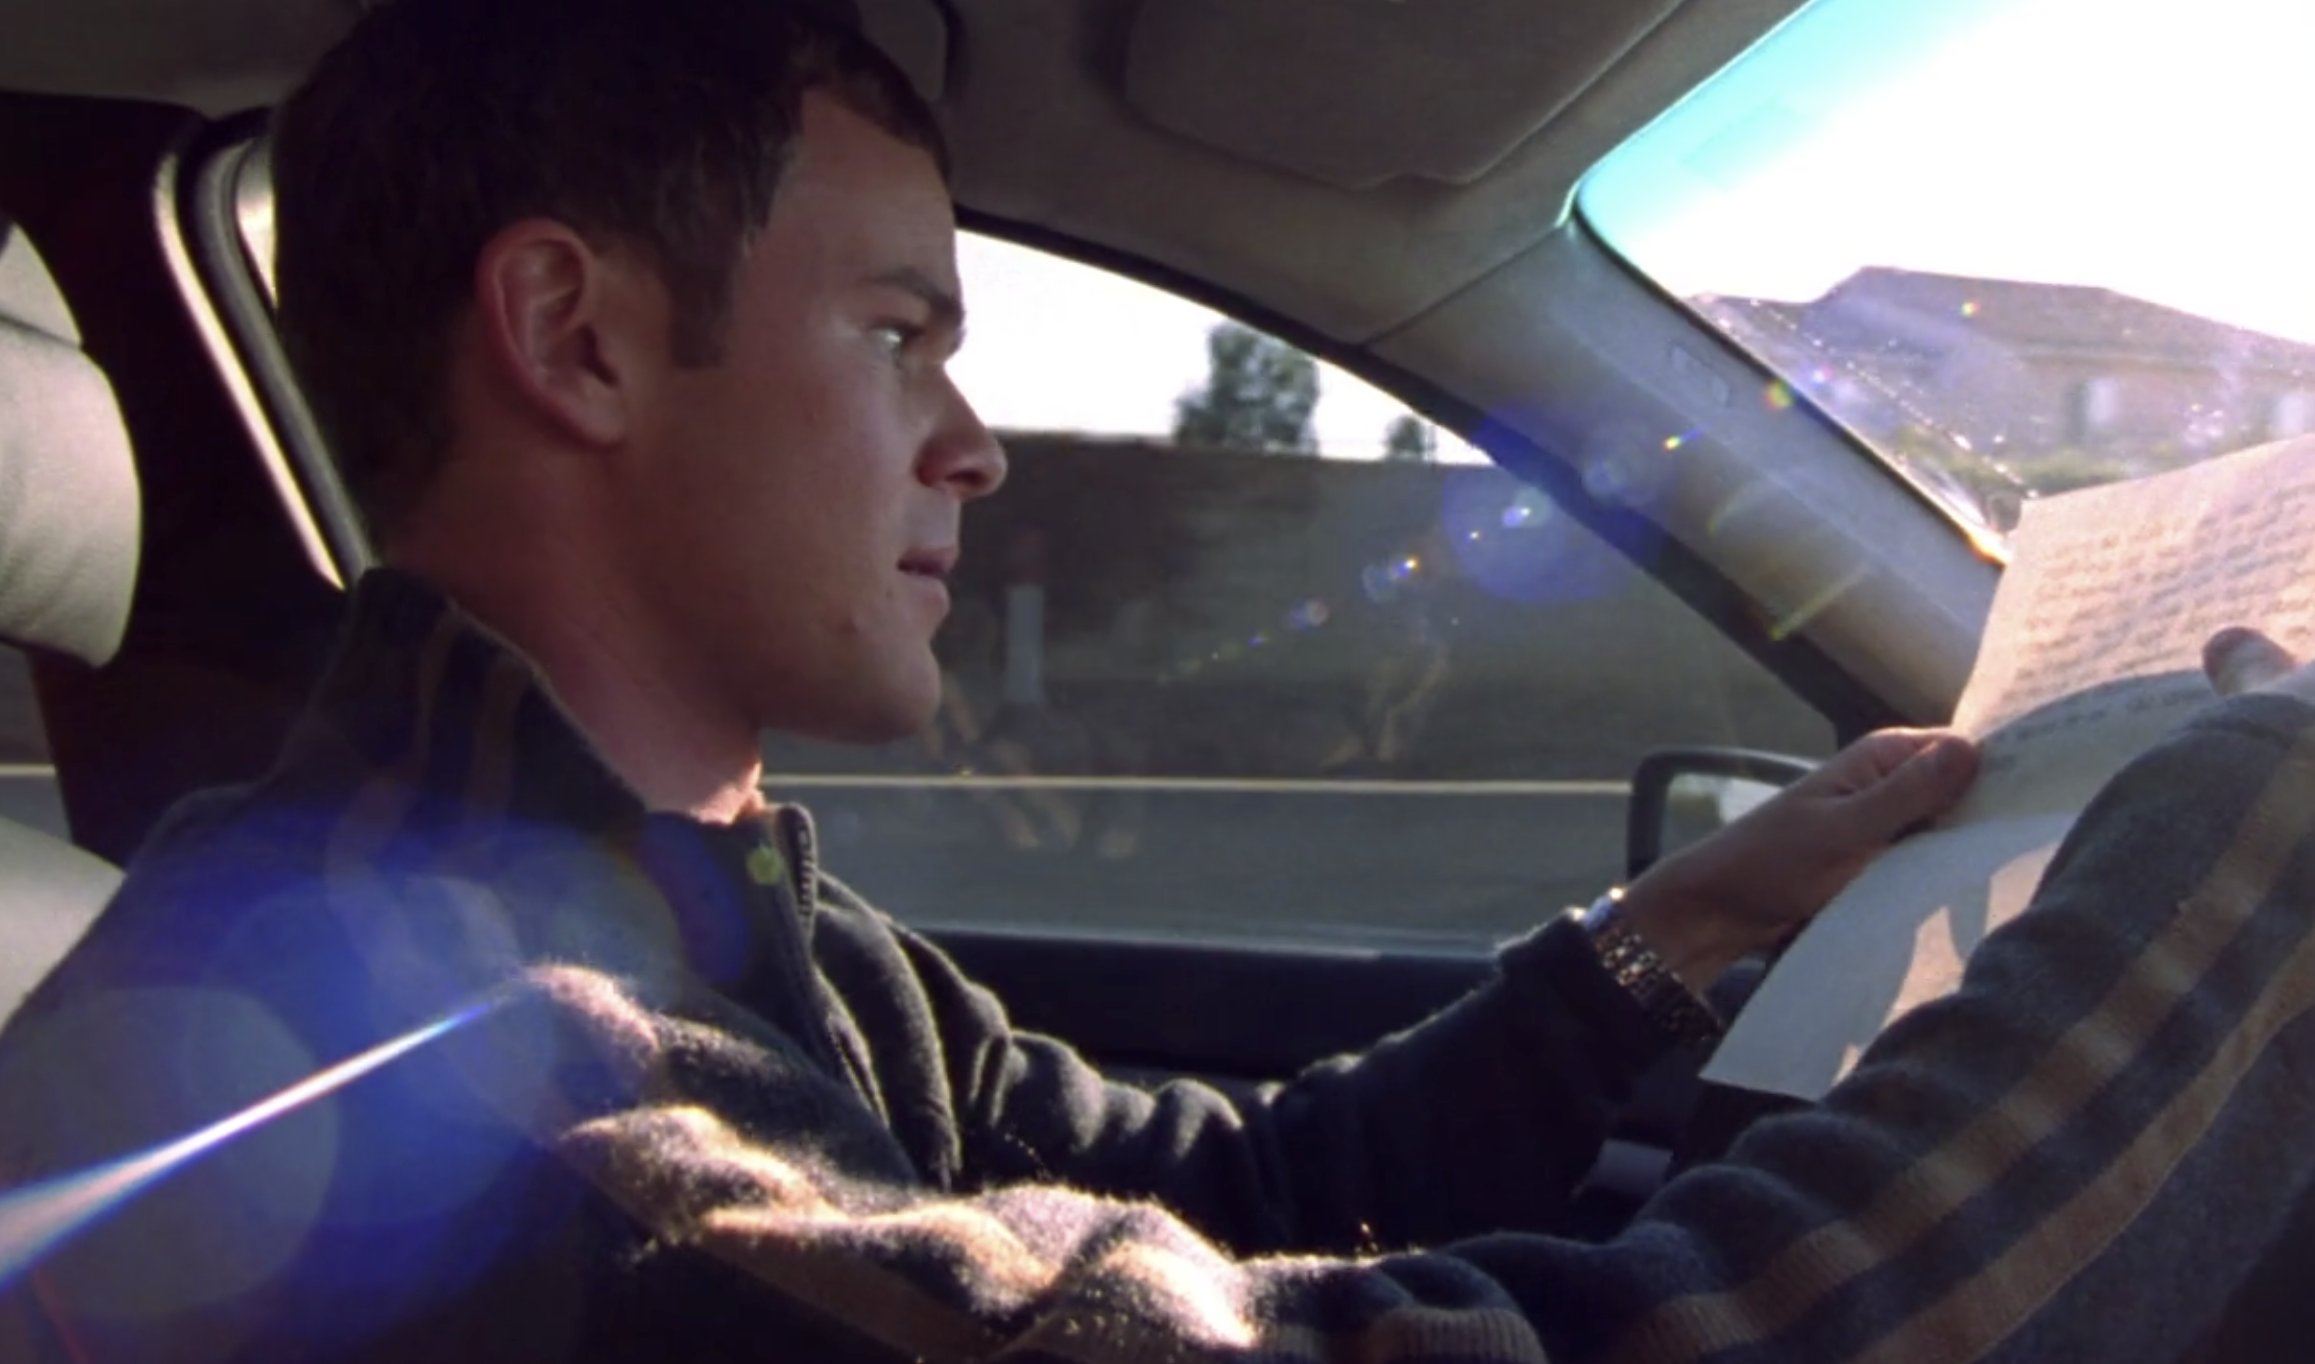 A screenshot from S1E5 of Veronica Mars. Troy is driving a car and holding a handwritten letter from Veronica, his hands leaning on the steering wheel. He looks perturbed.